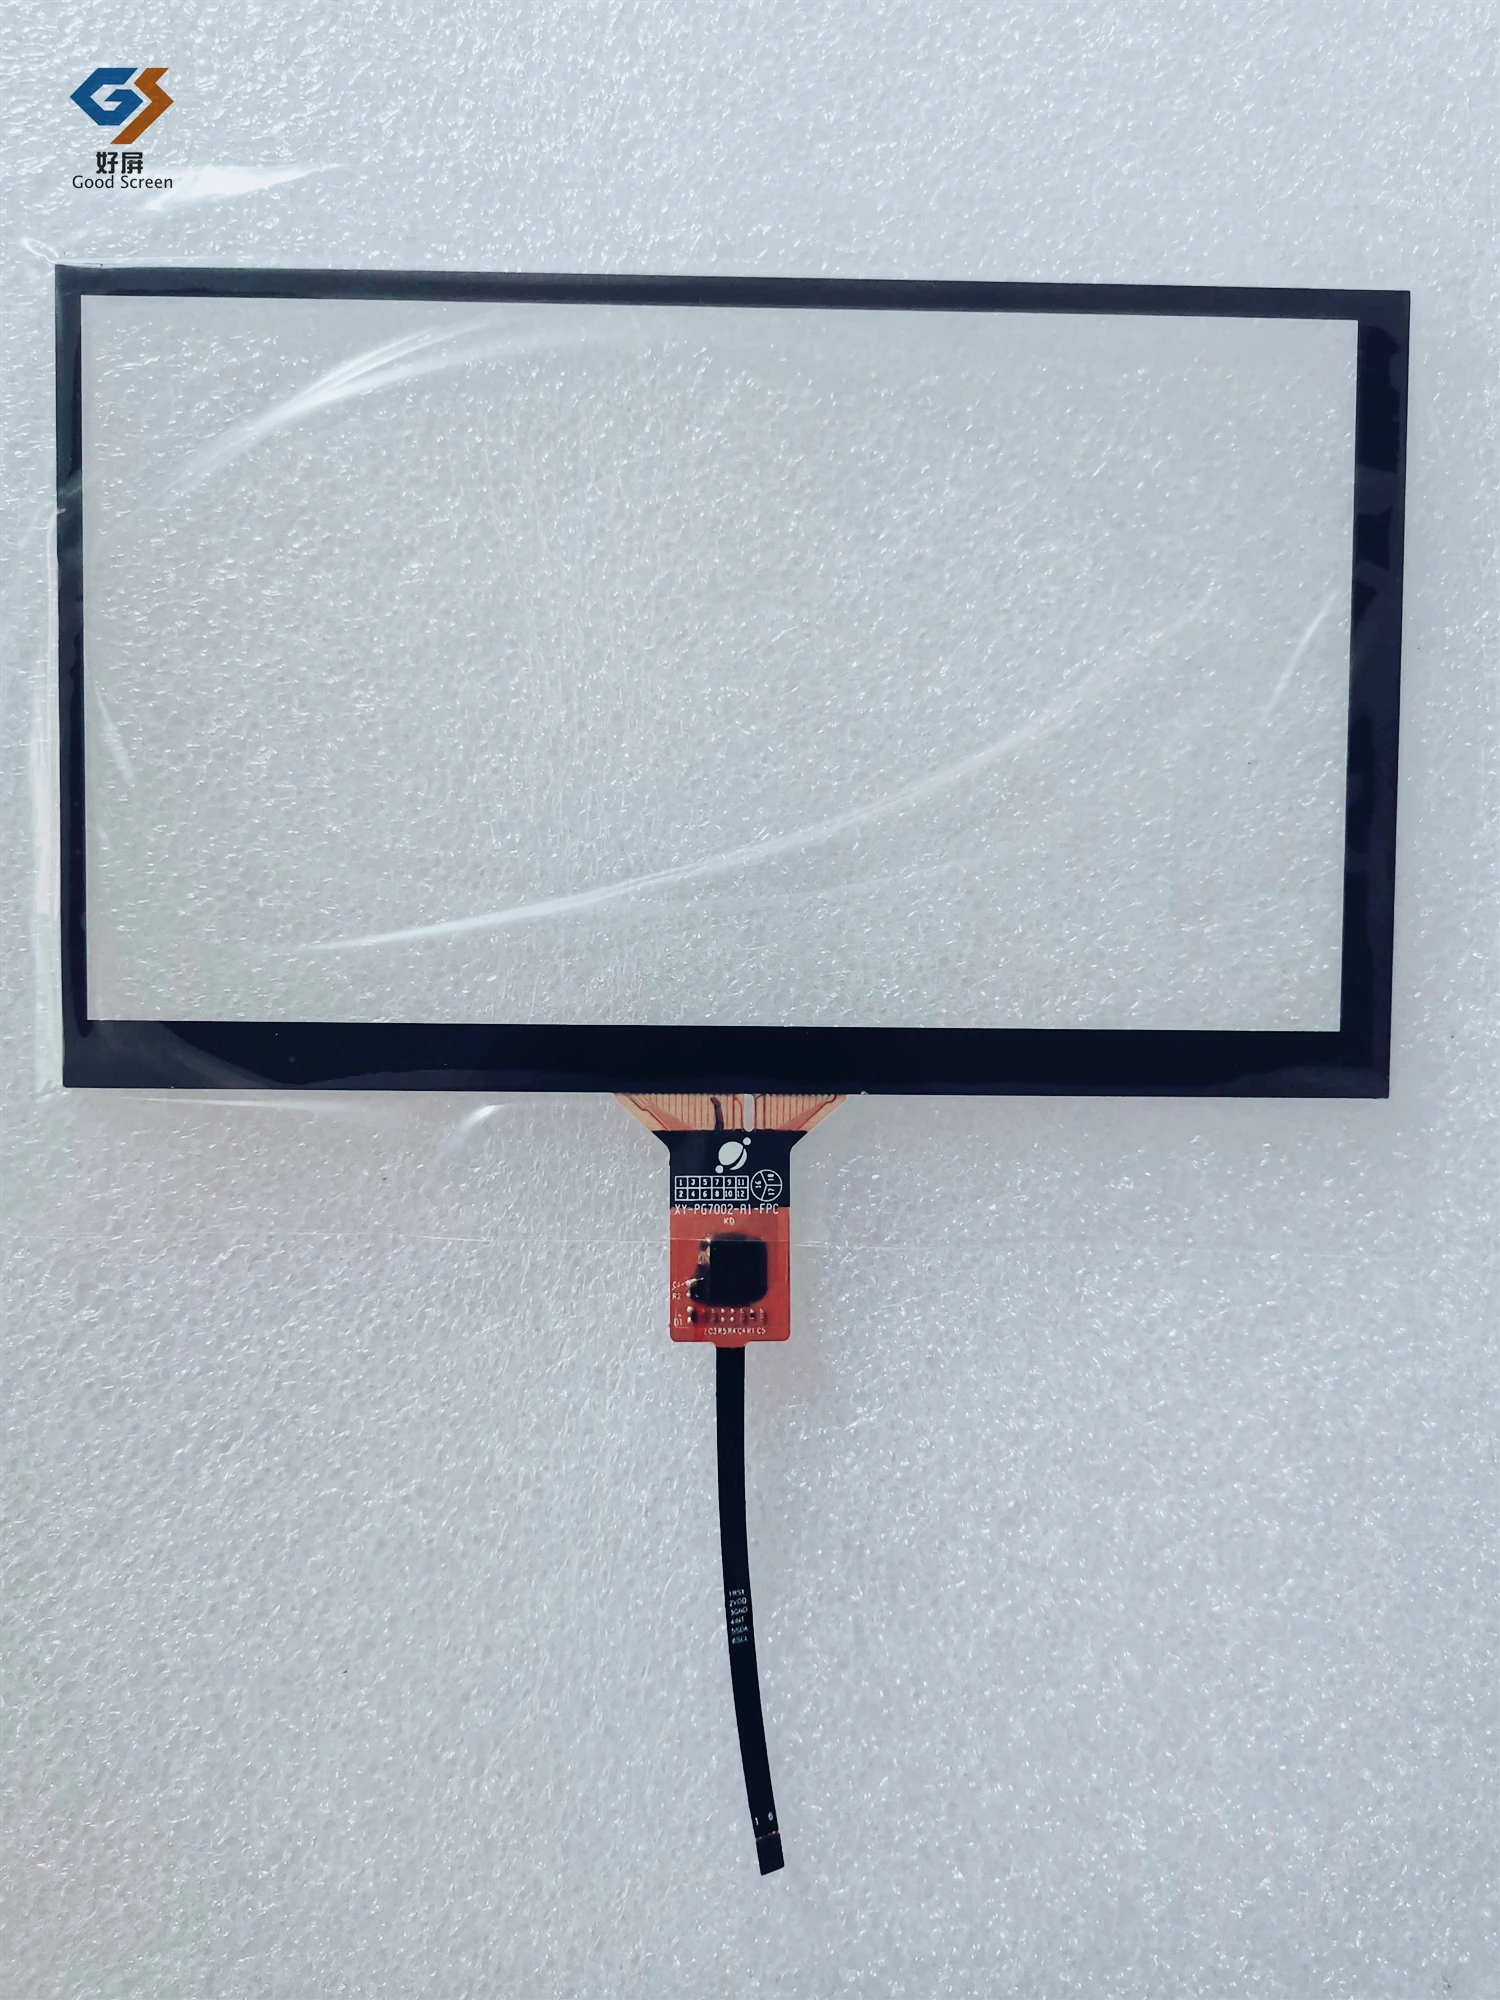 

6.2 7 inch touch screen P/N XY-PG7002-A1-FPC Car navigation GPS touch screen panel repair replacement parts XY-PG7002-FPC